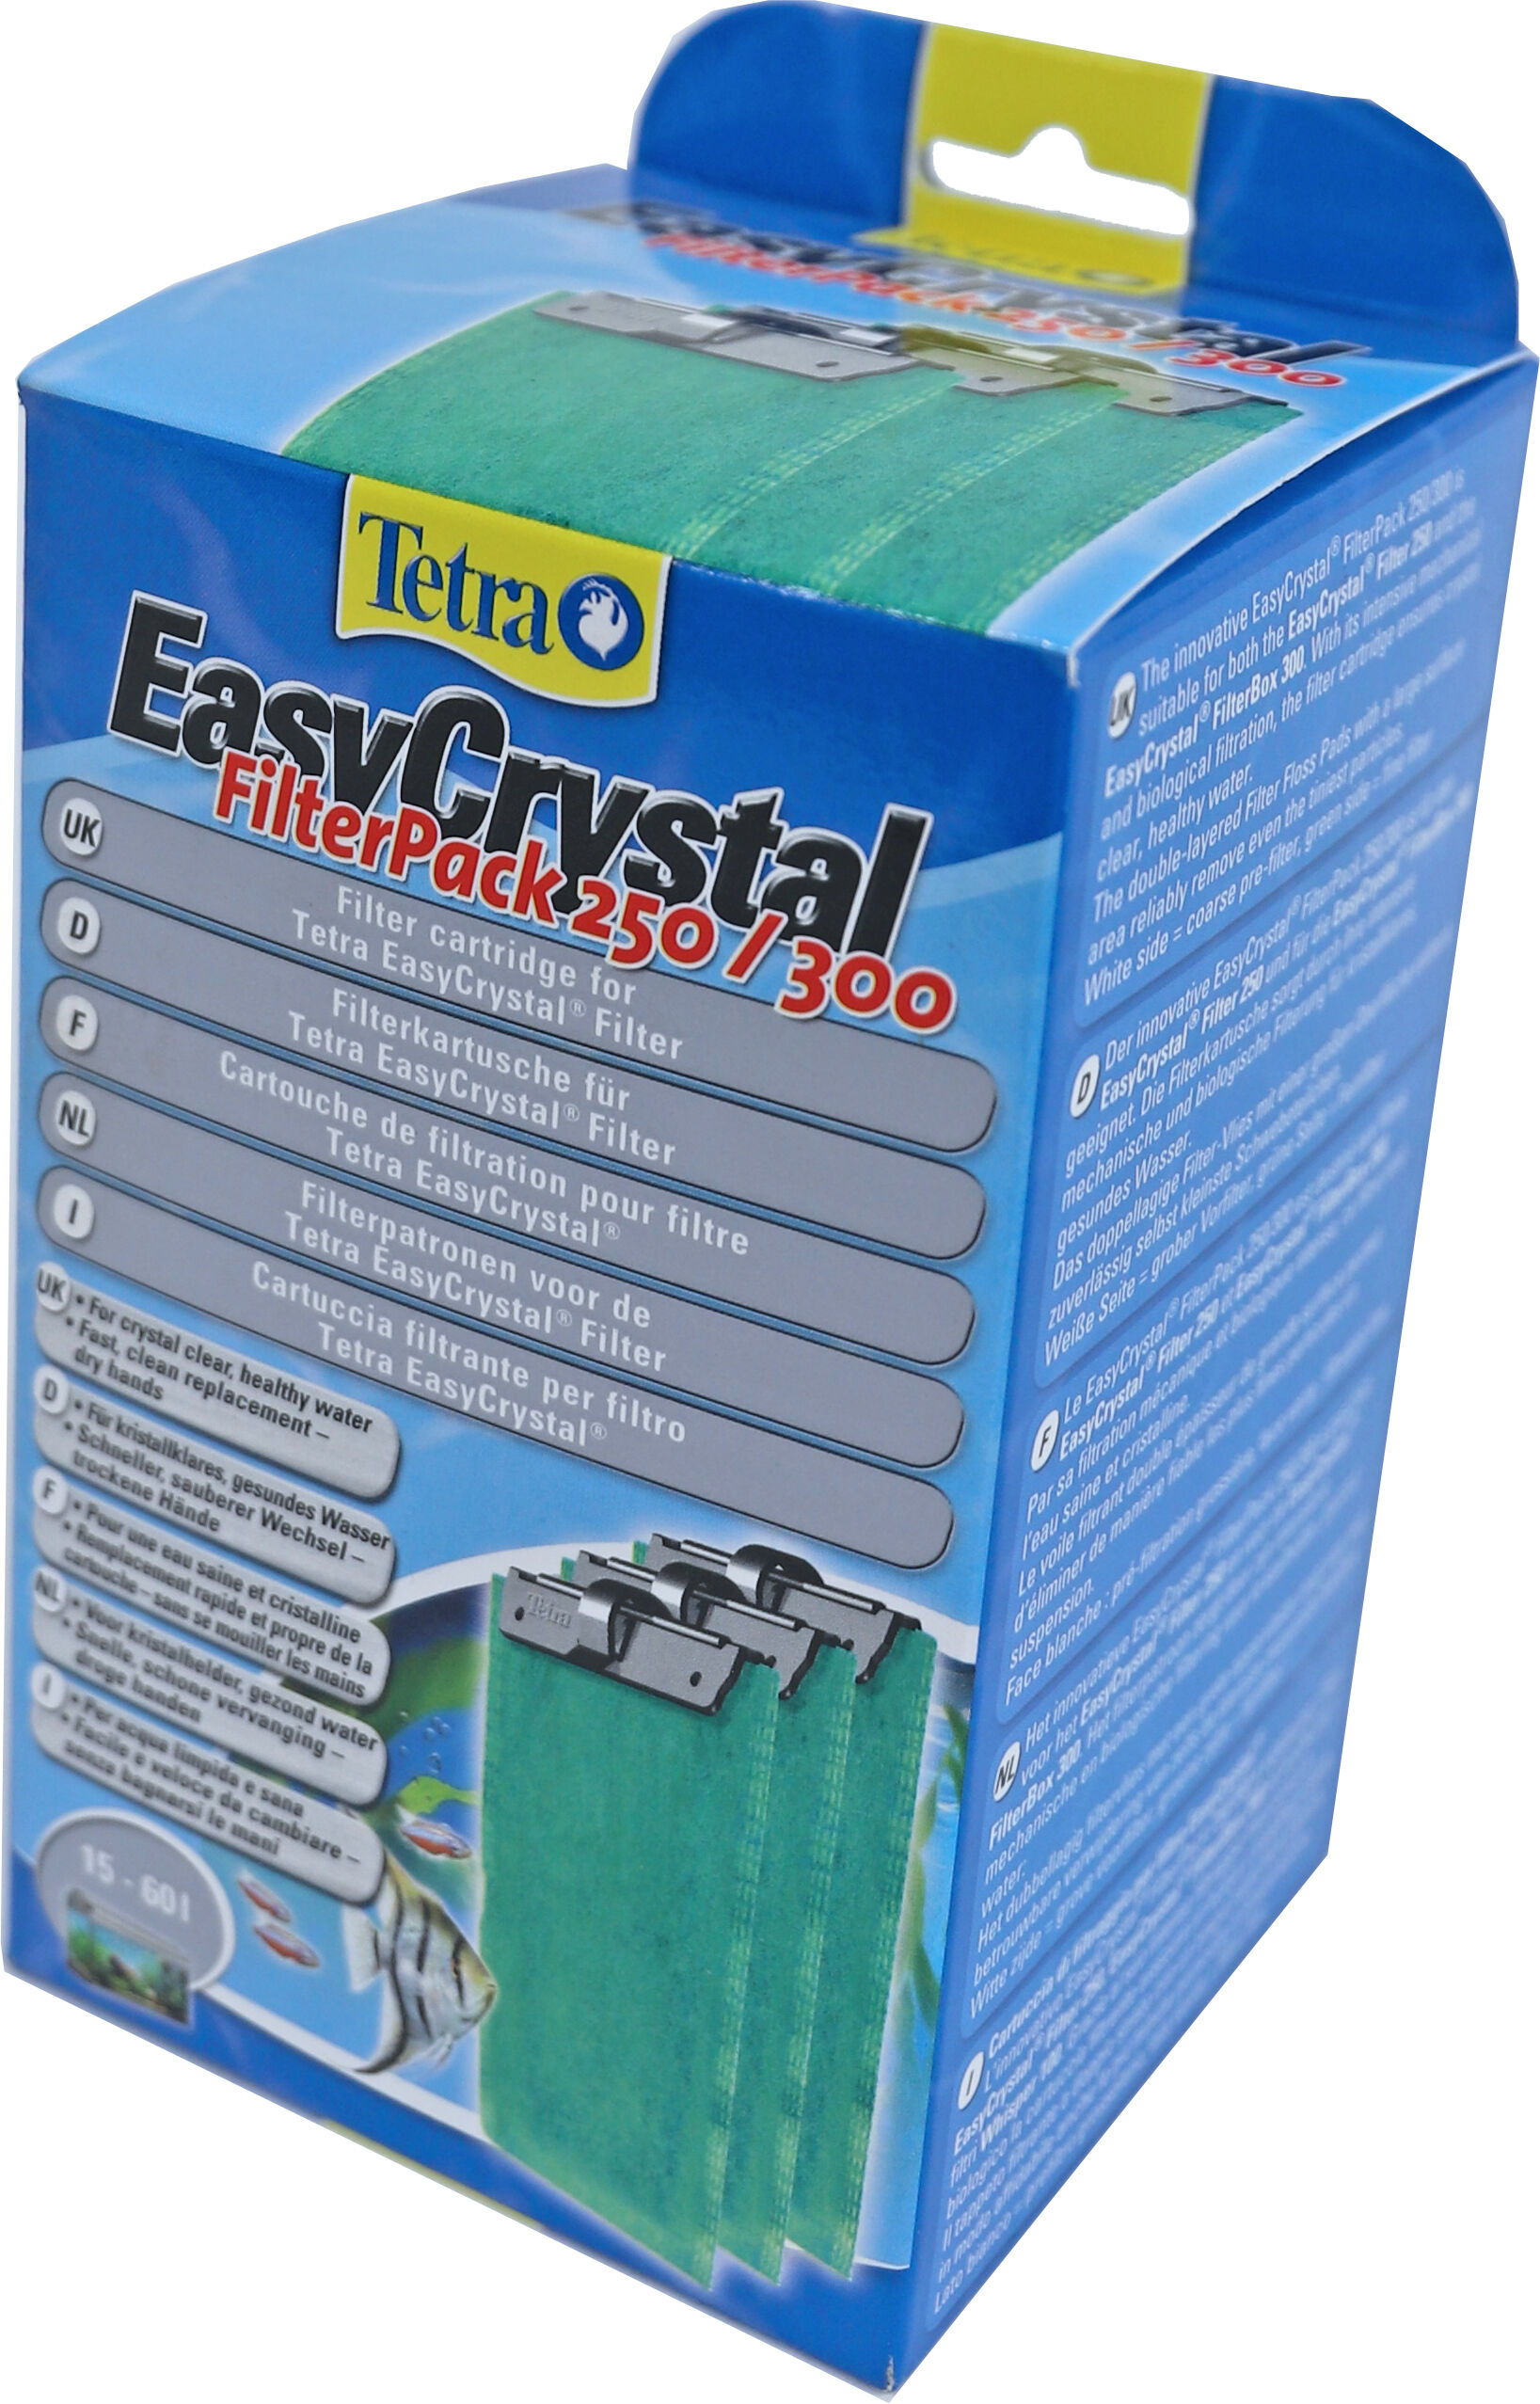 Filterpack Easy Cristal 250/300 Pak A 3